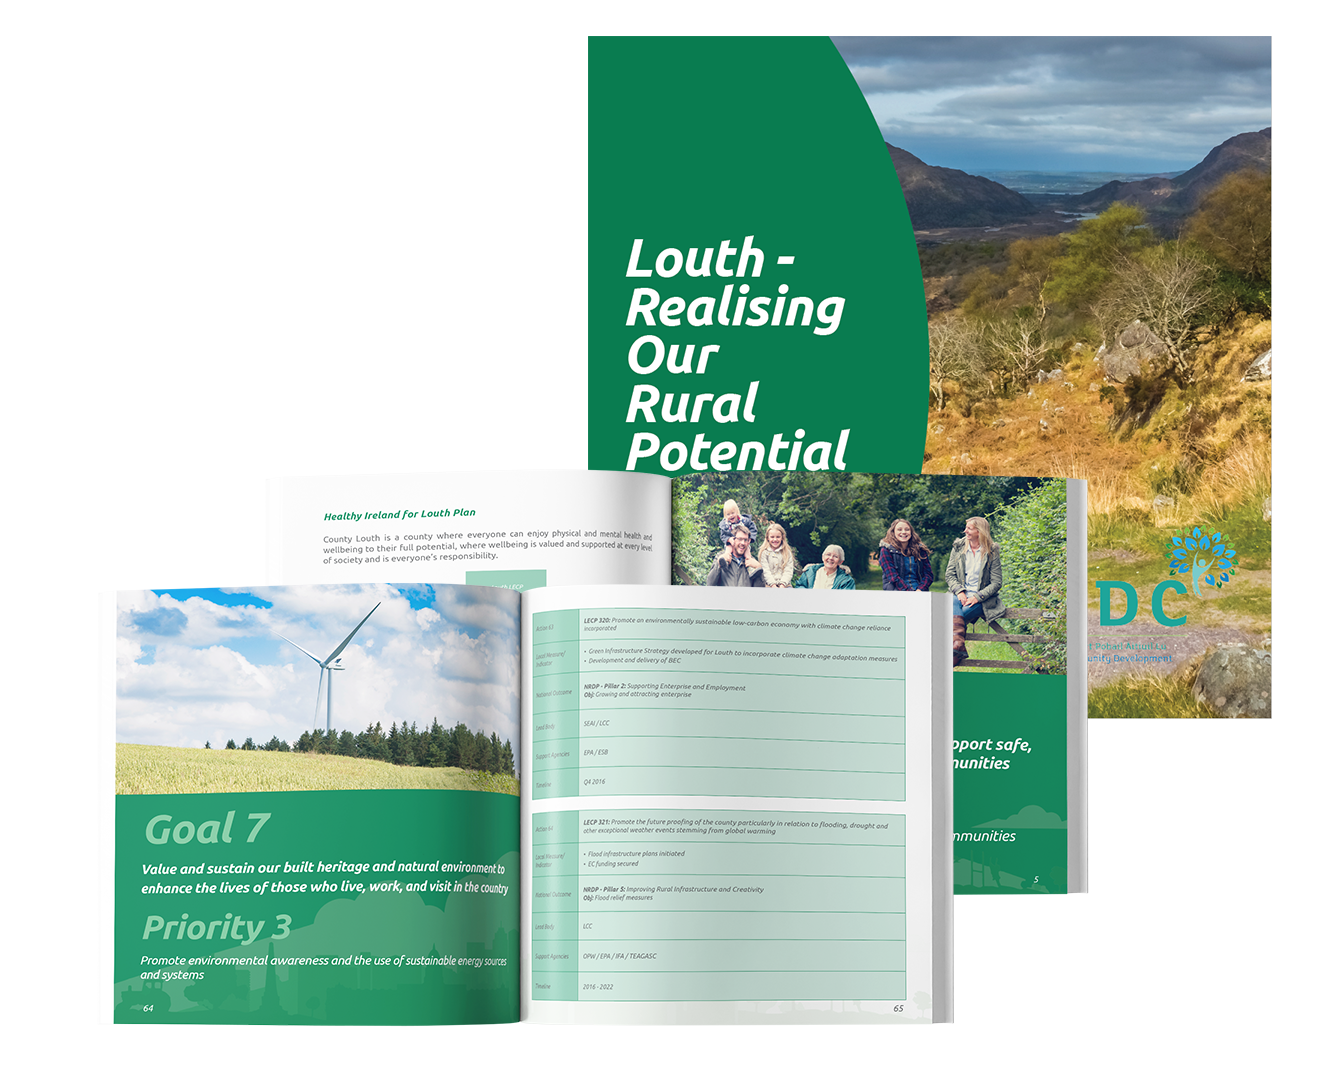 Creative Solutions for Government Publications - Louth Realising Our Rural Potential Brochure Mockup - Graphic Design by The Digital Bakery Creative Agency in Dundalk Louth